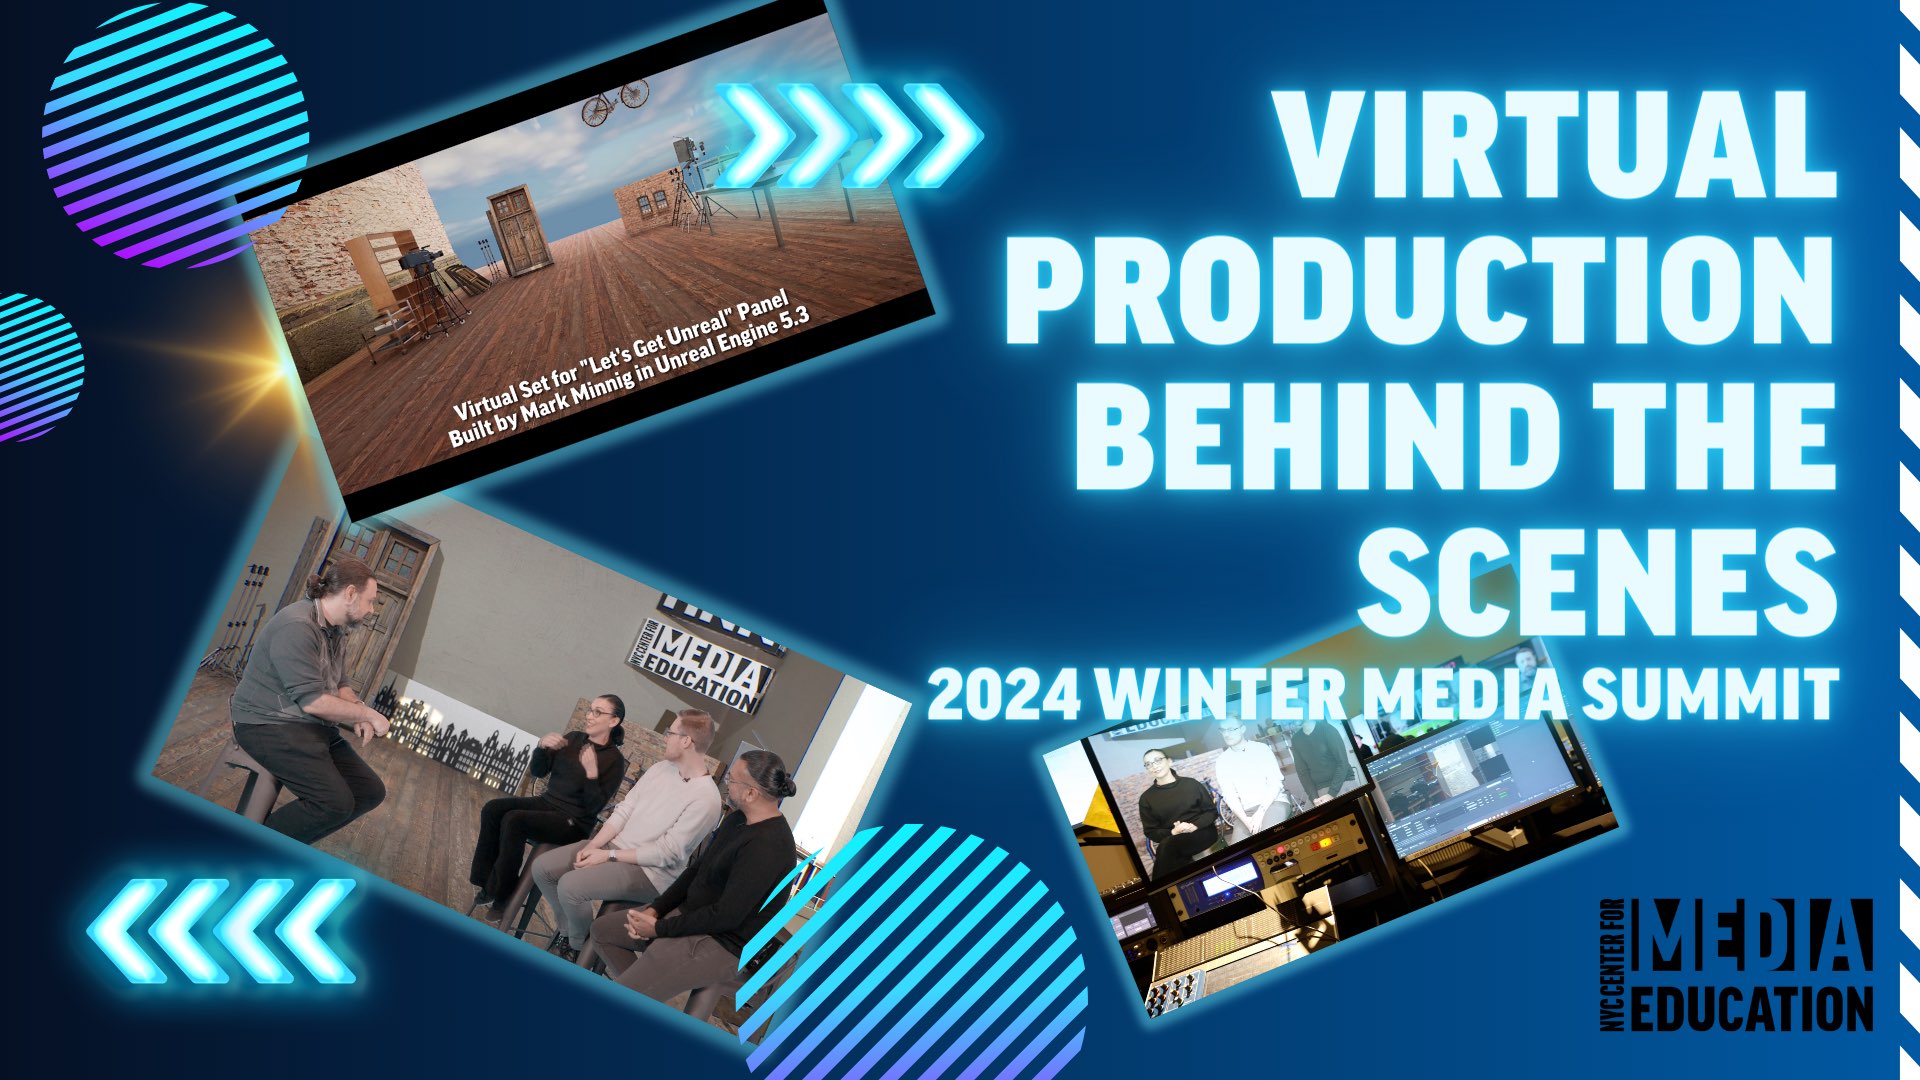 Graphic for a YouTube Series on Virtual Production